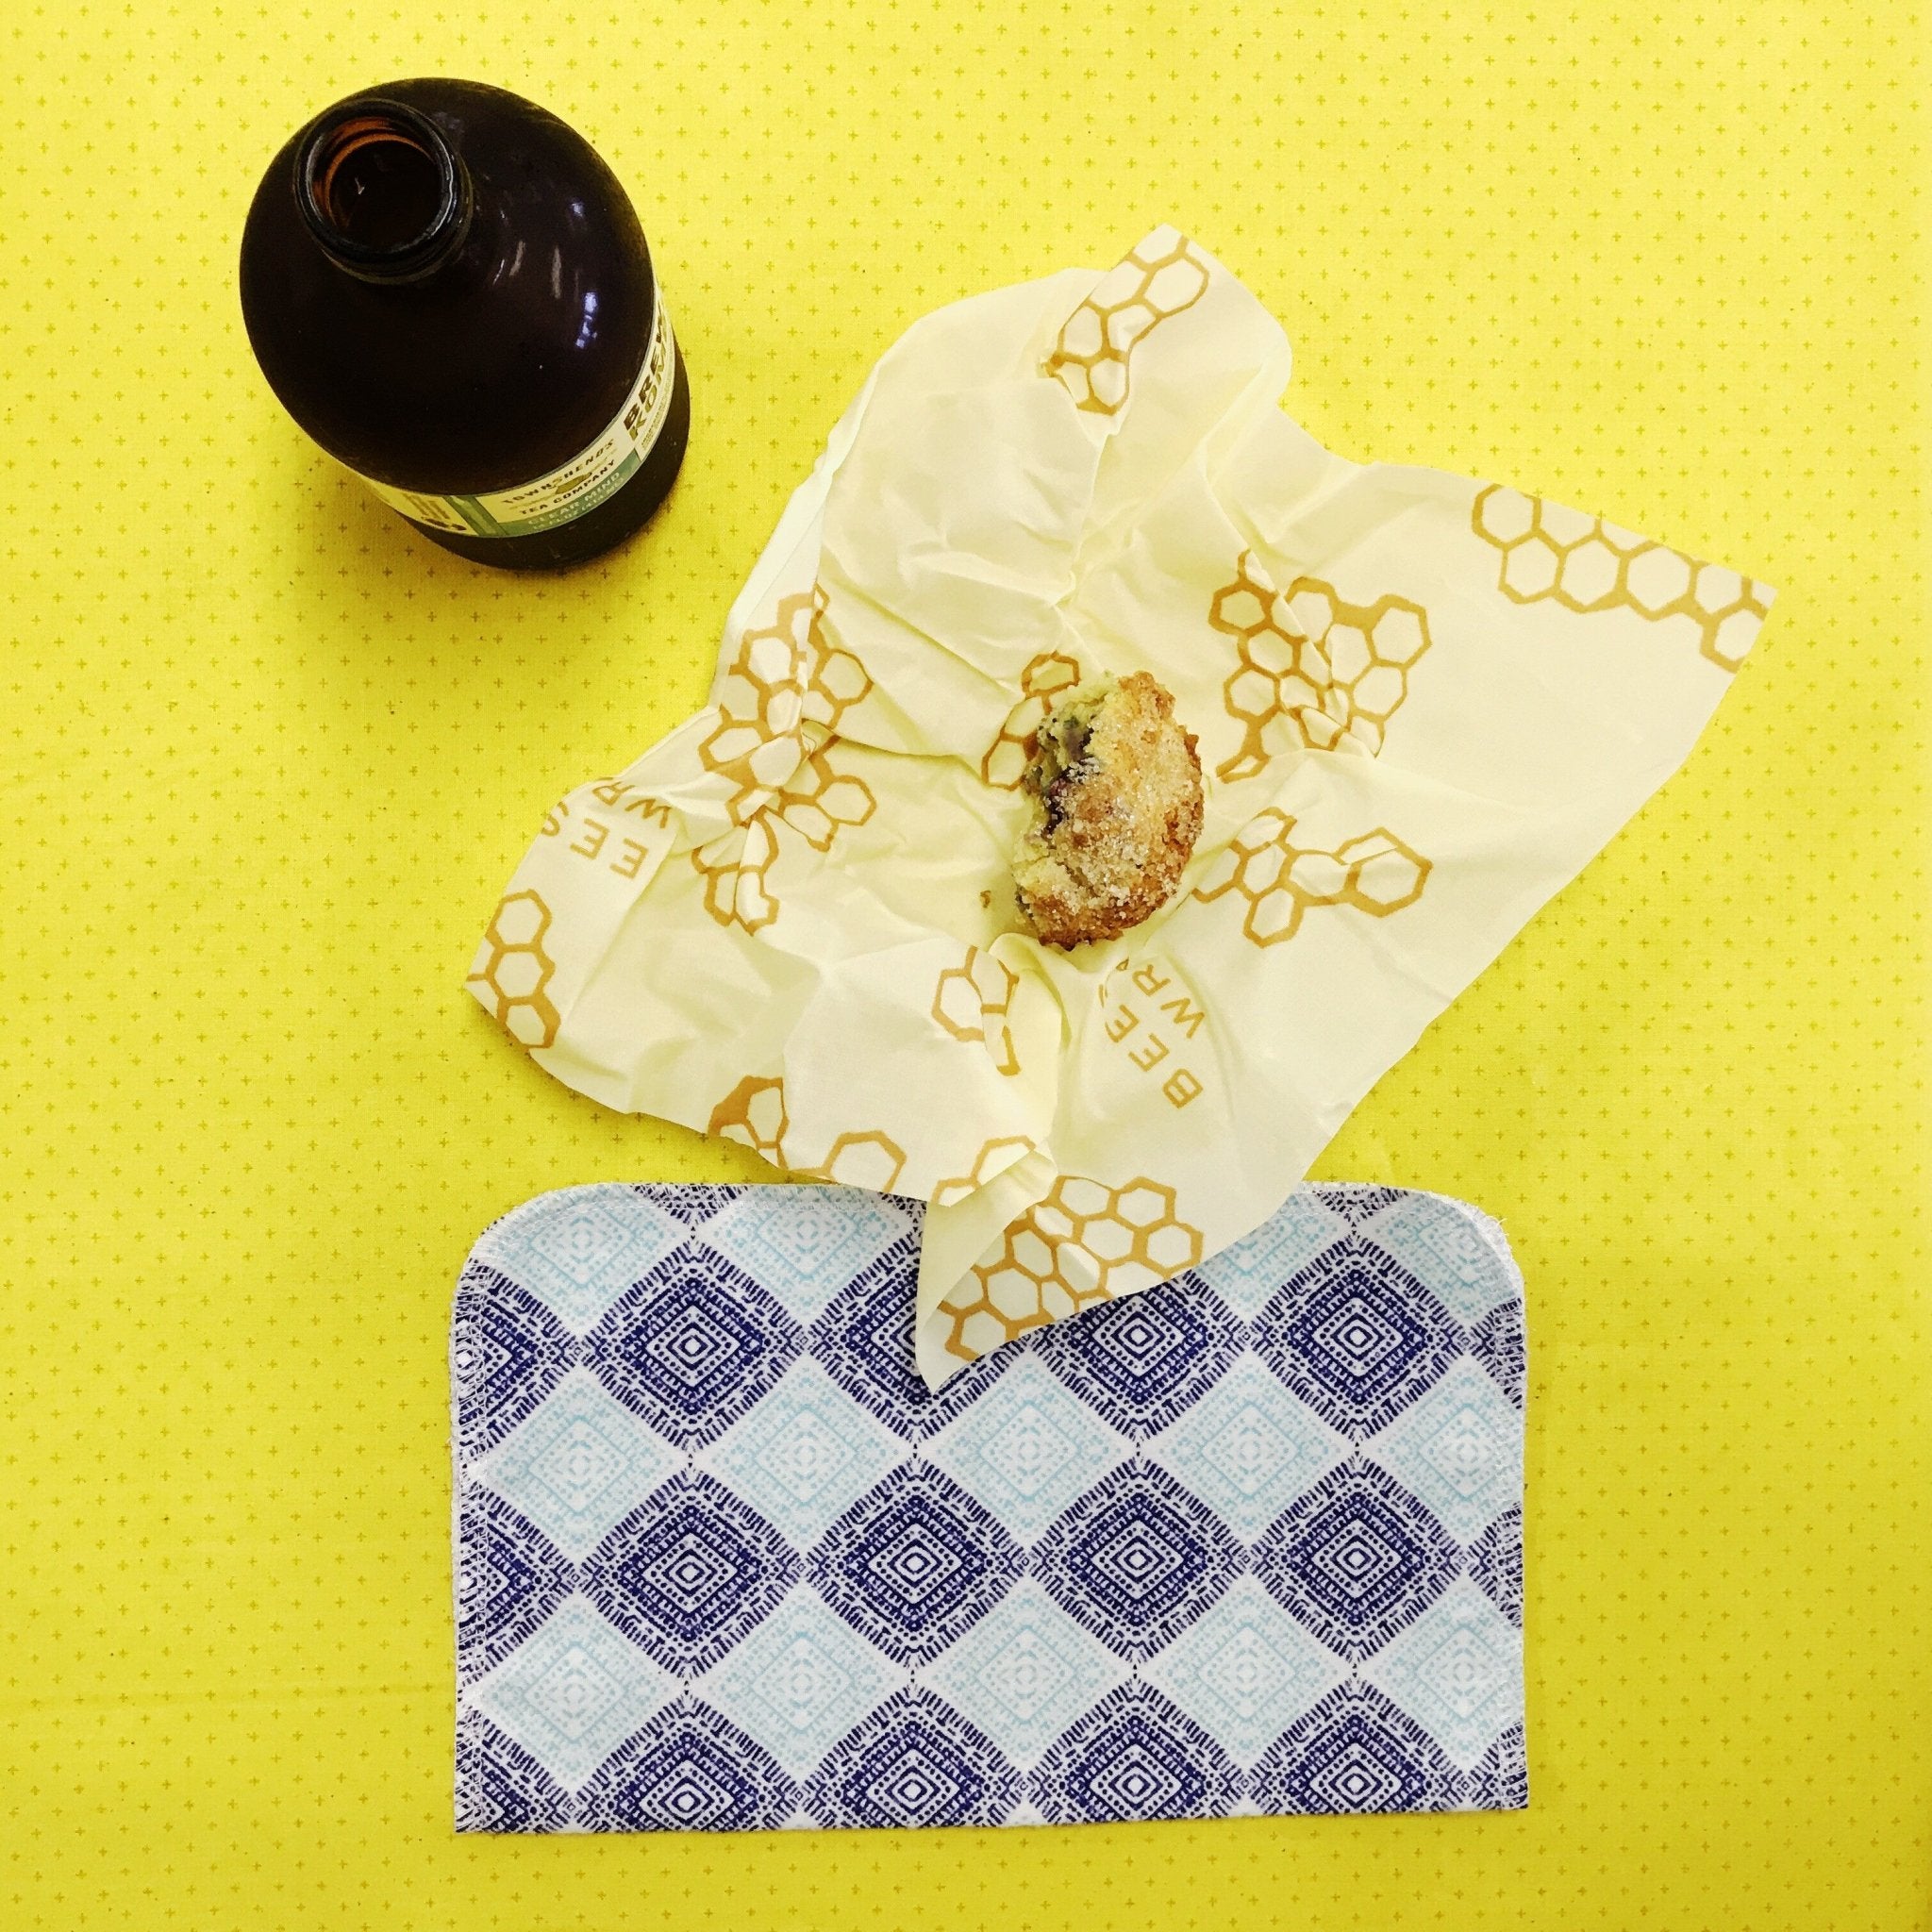 Beeswax Food Wrap: Honeycomb - Marley's Monsters